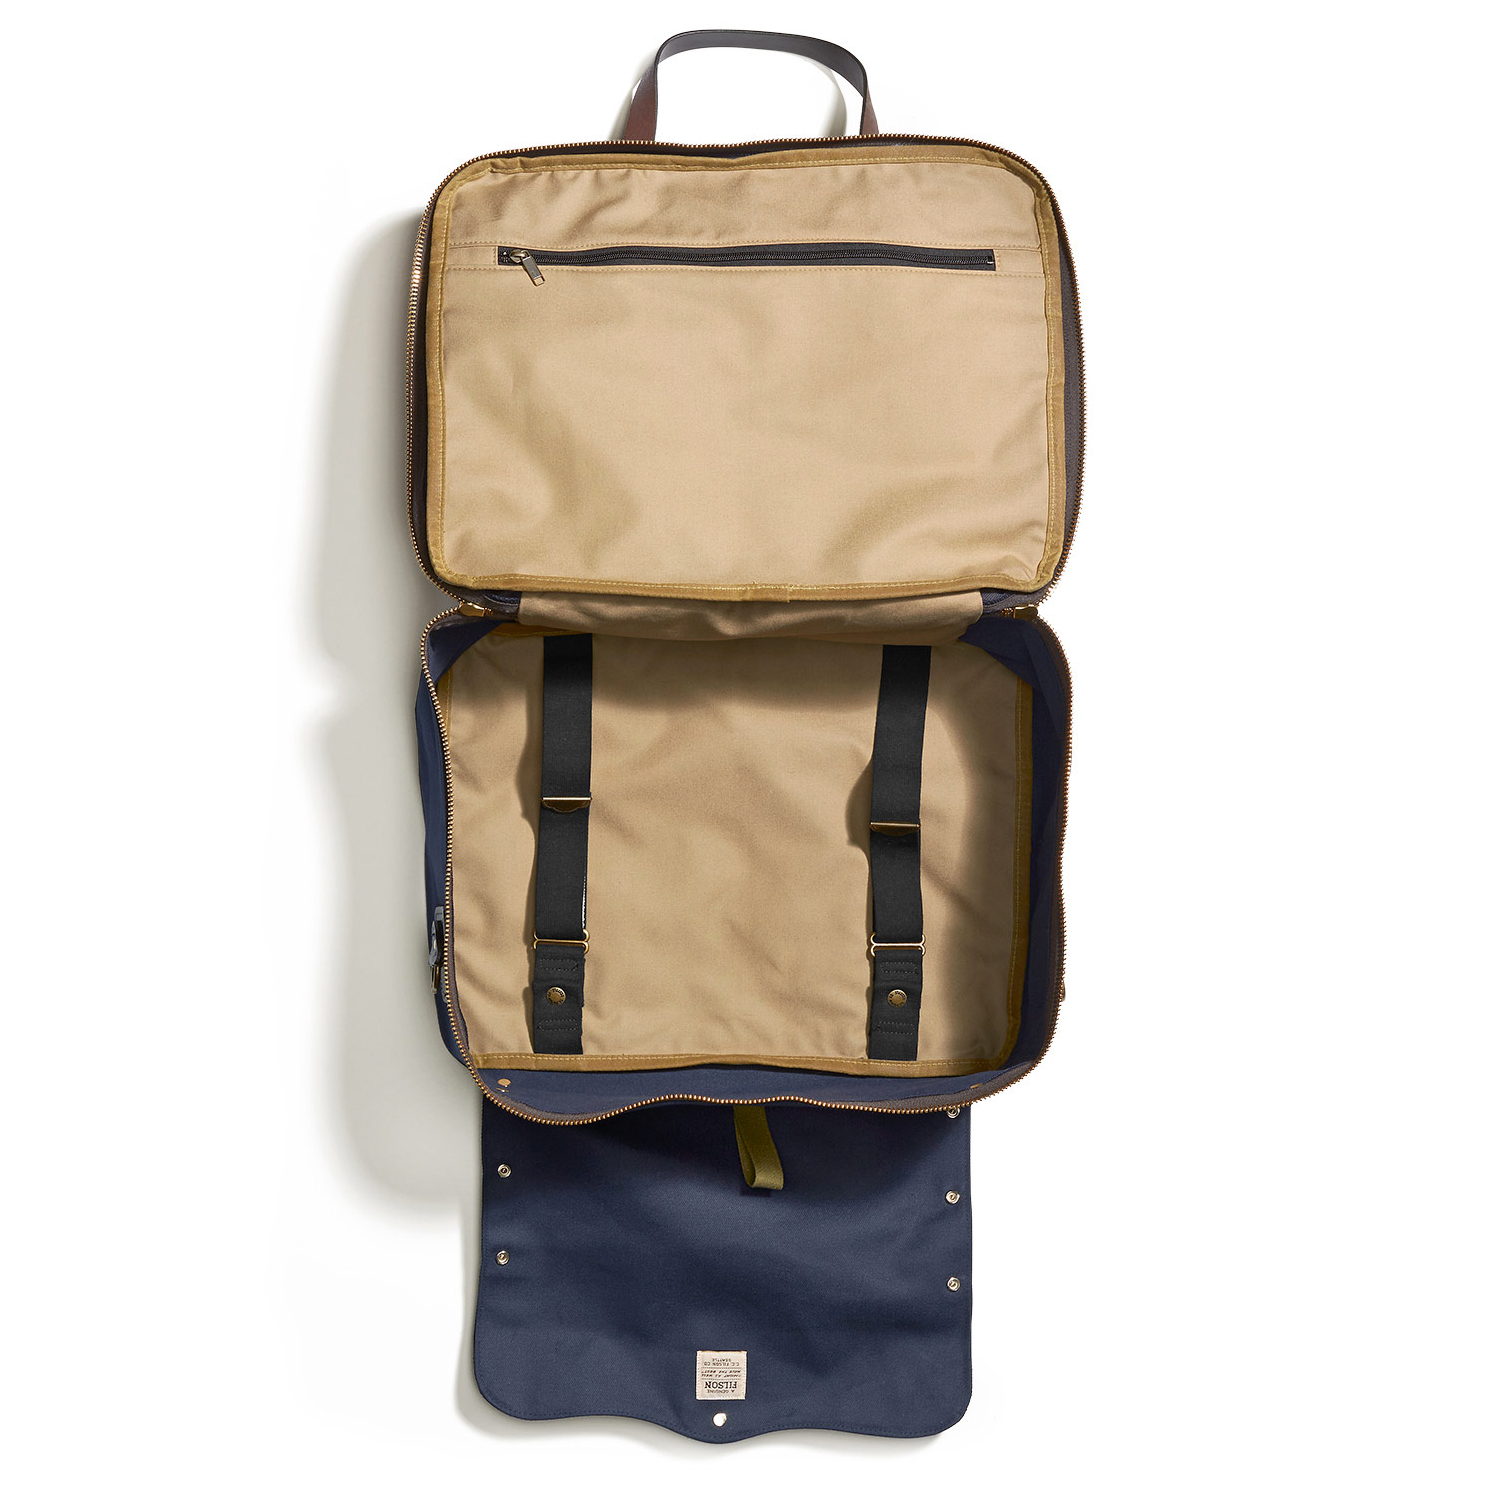 Large Twill Carry-On Travel Bag